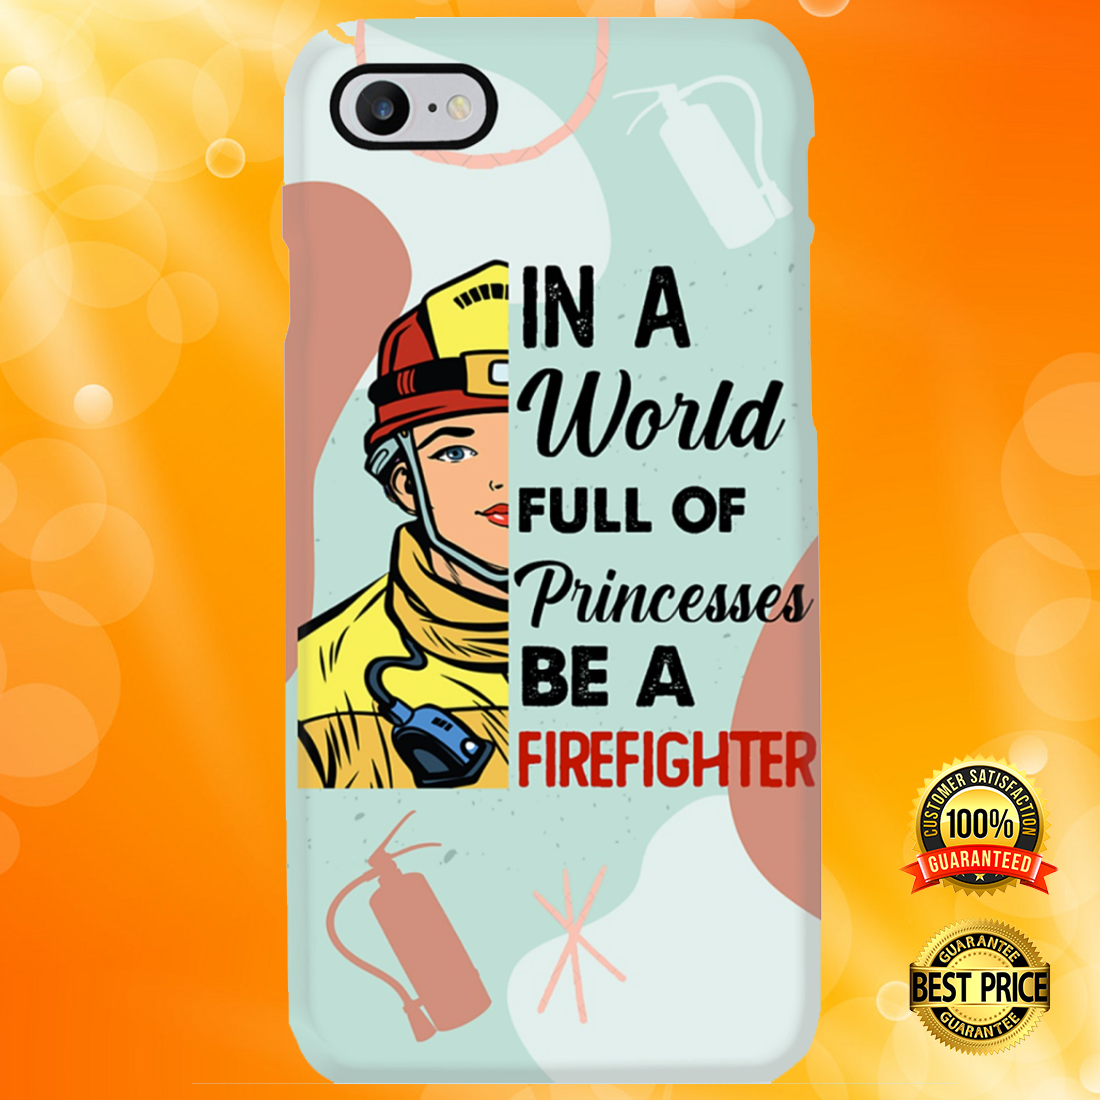 In a world full of princesses be a firefighter phone case